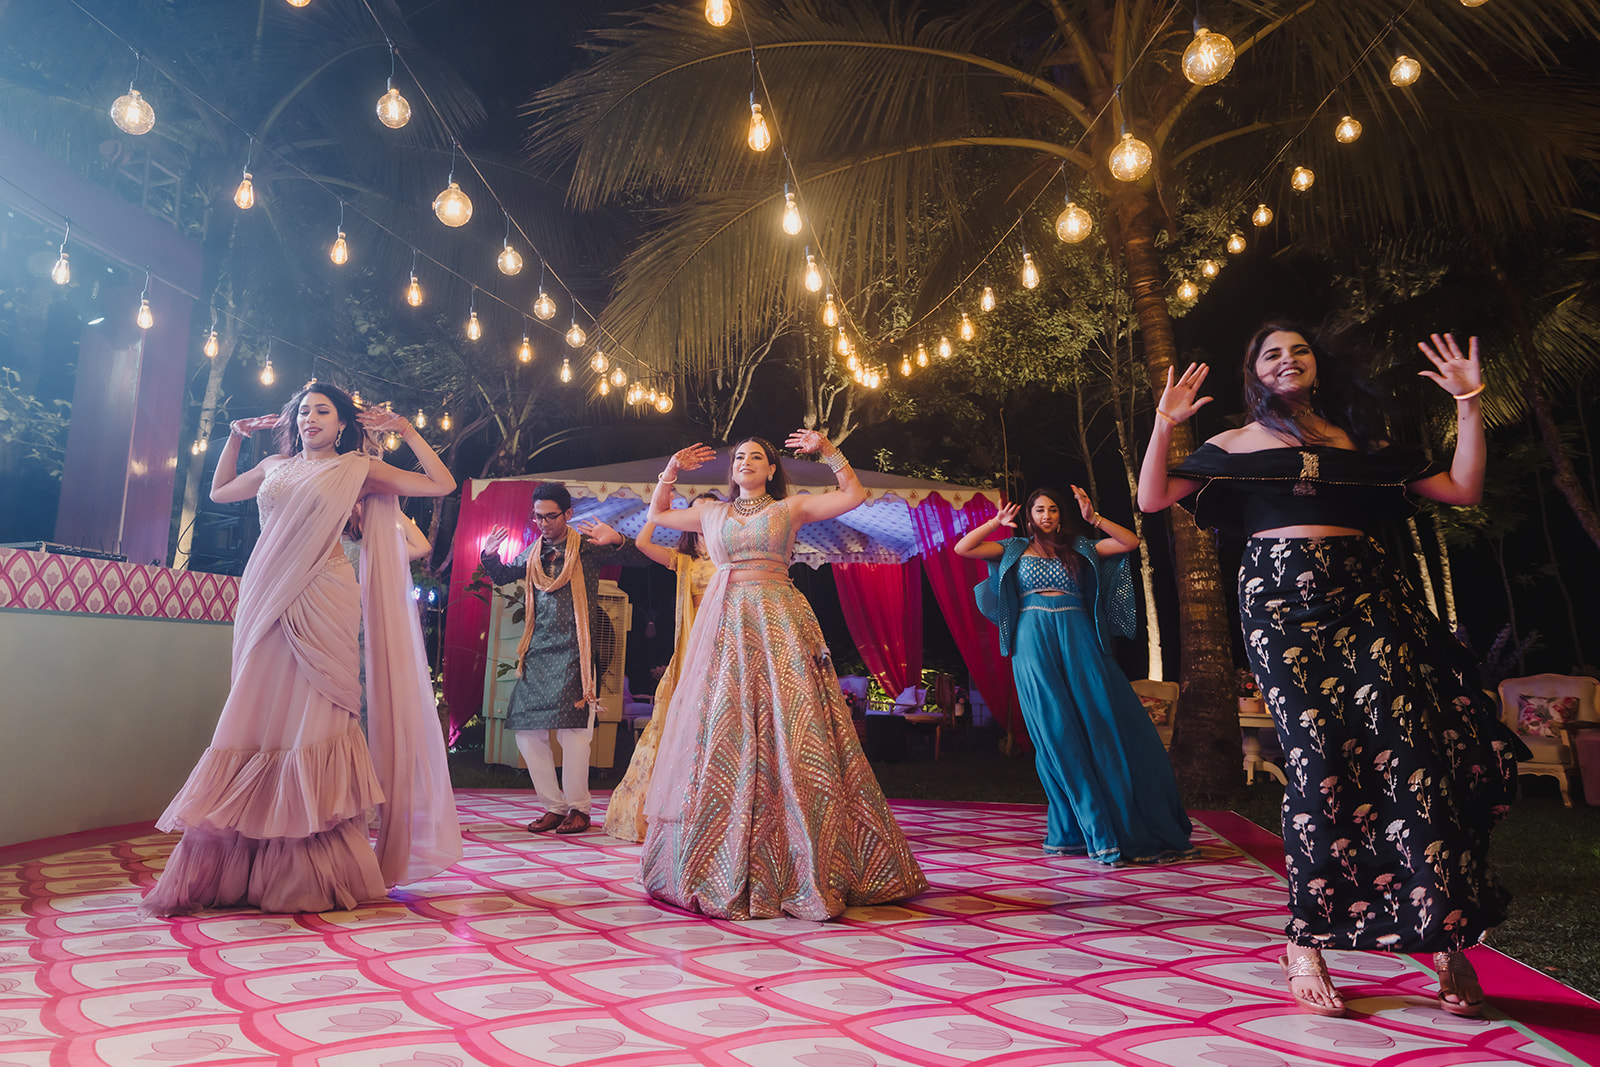 Family dance: Capturing the fun and energy as the bride enjoys a dance with her cousins